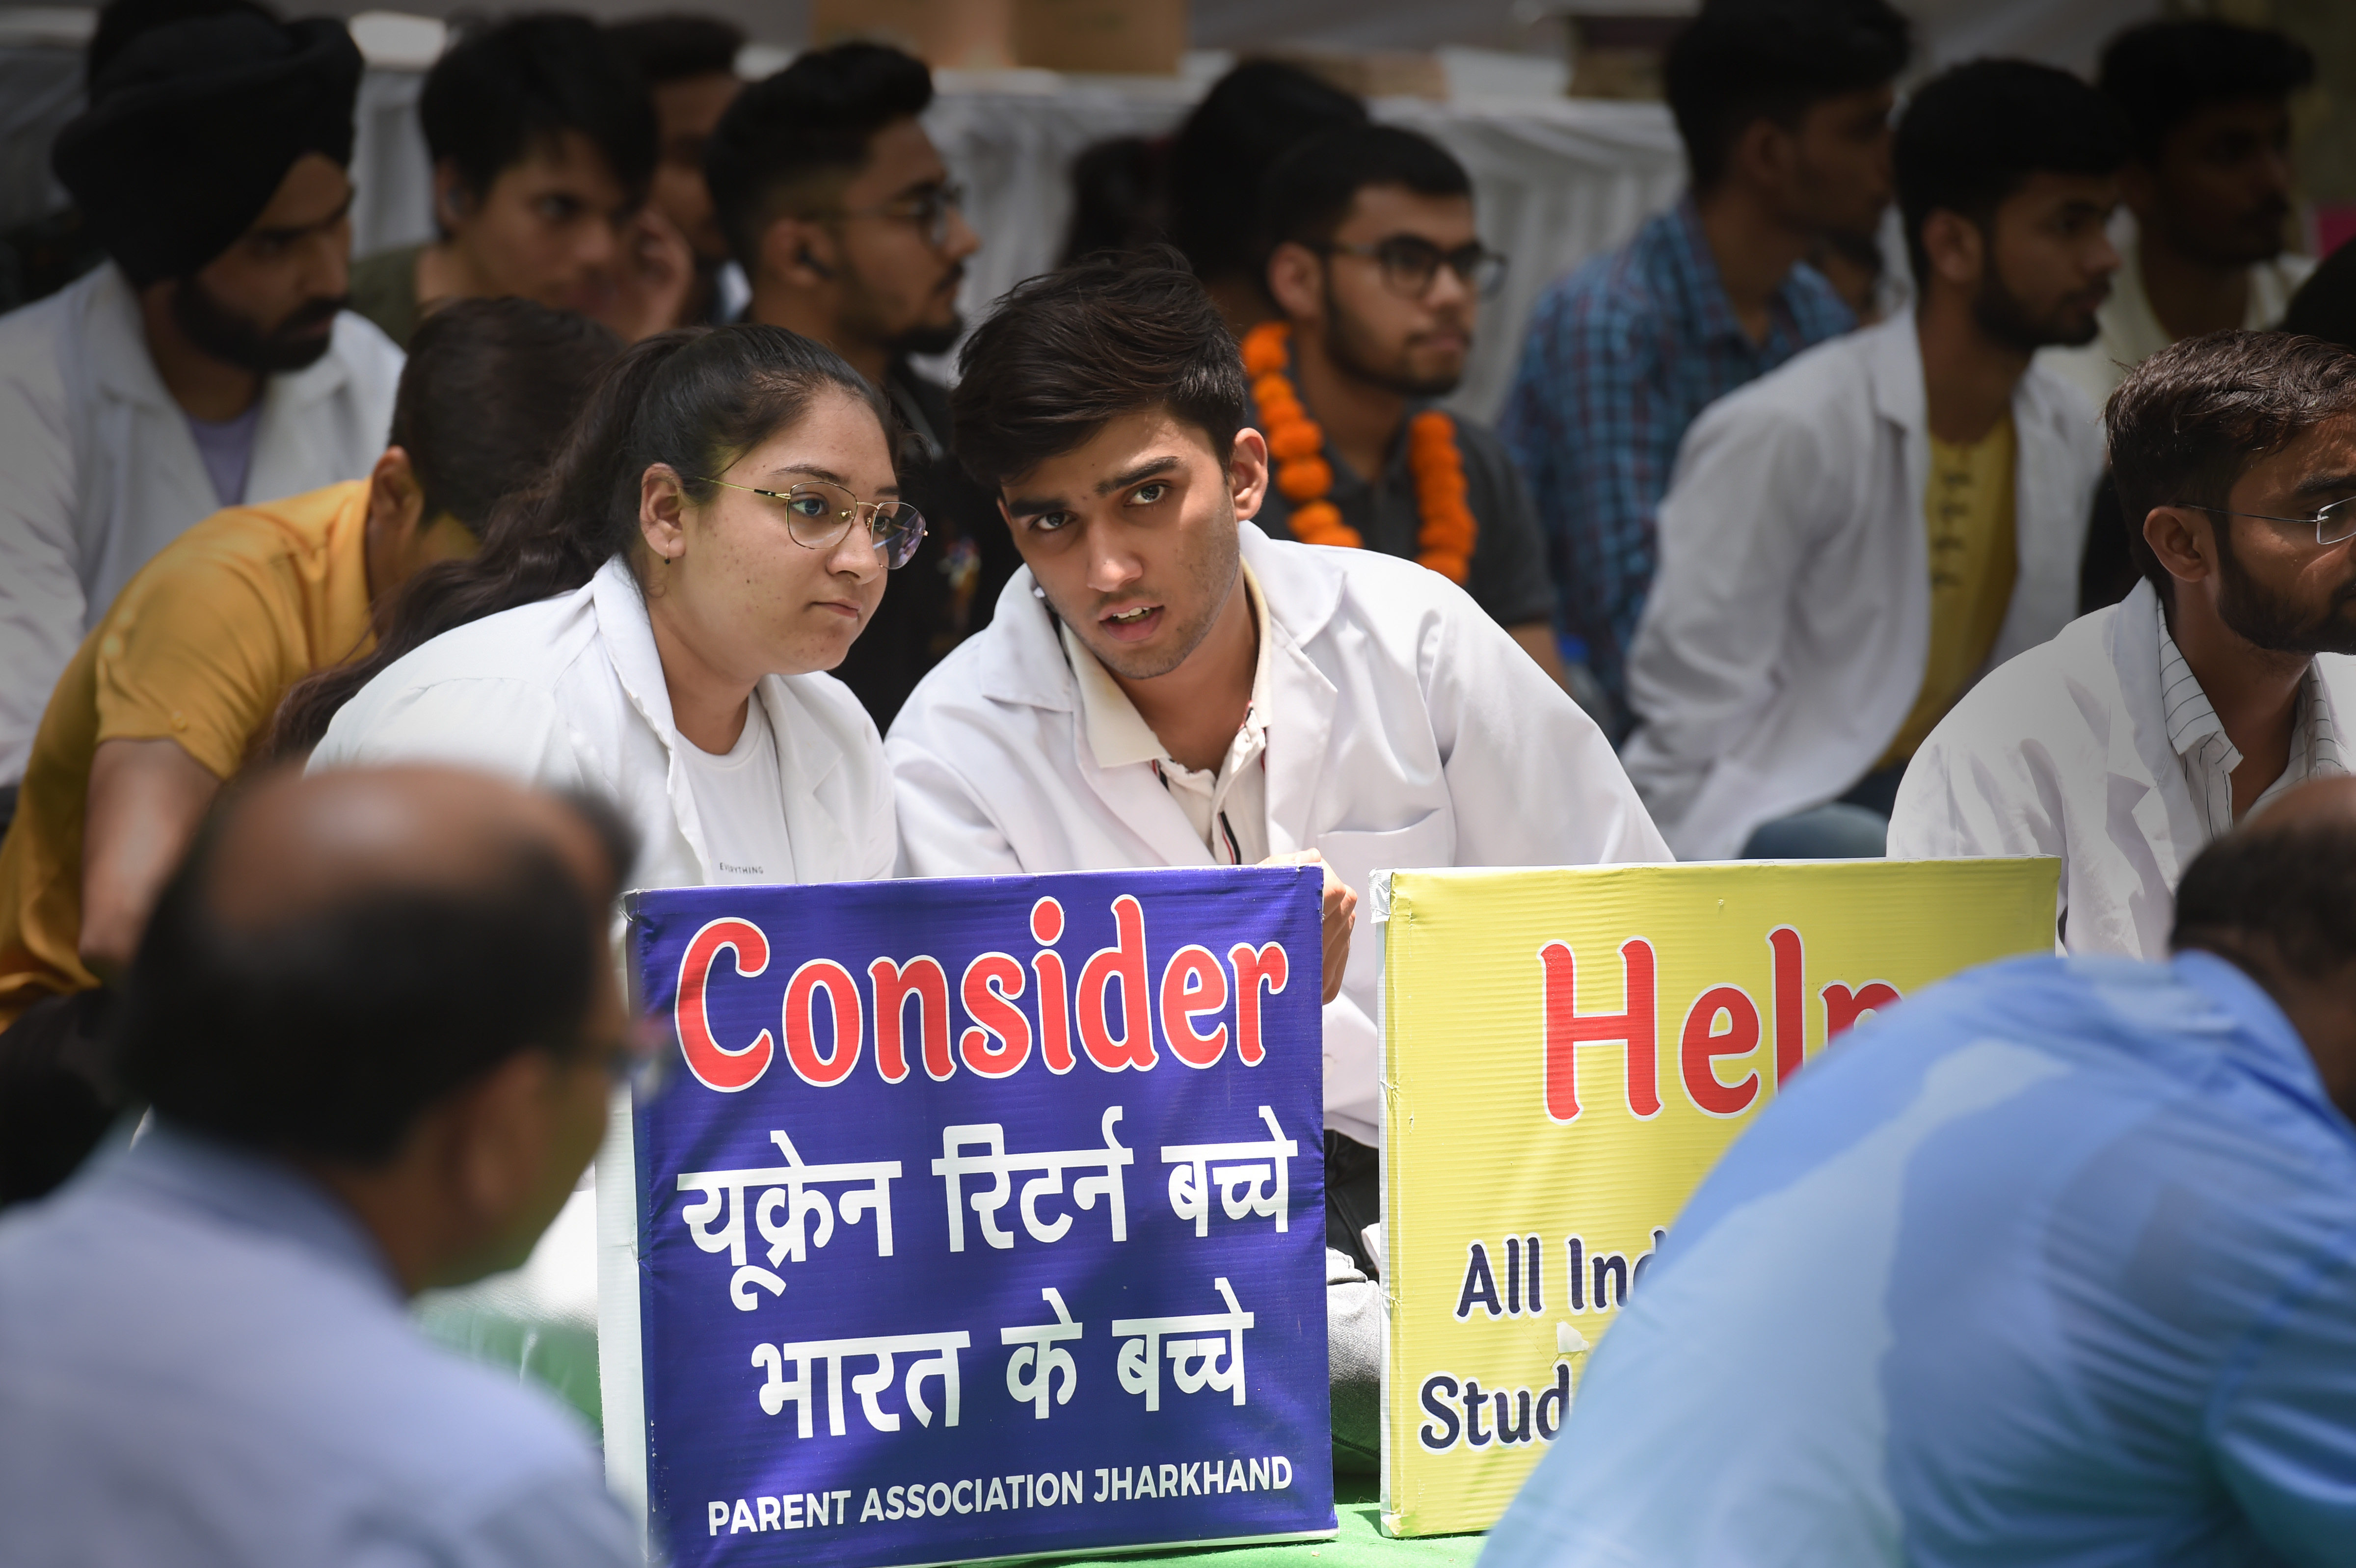 Demanding admission in Indian colleges, Ukraine-evacuated medical students sit on hunger strike